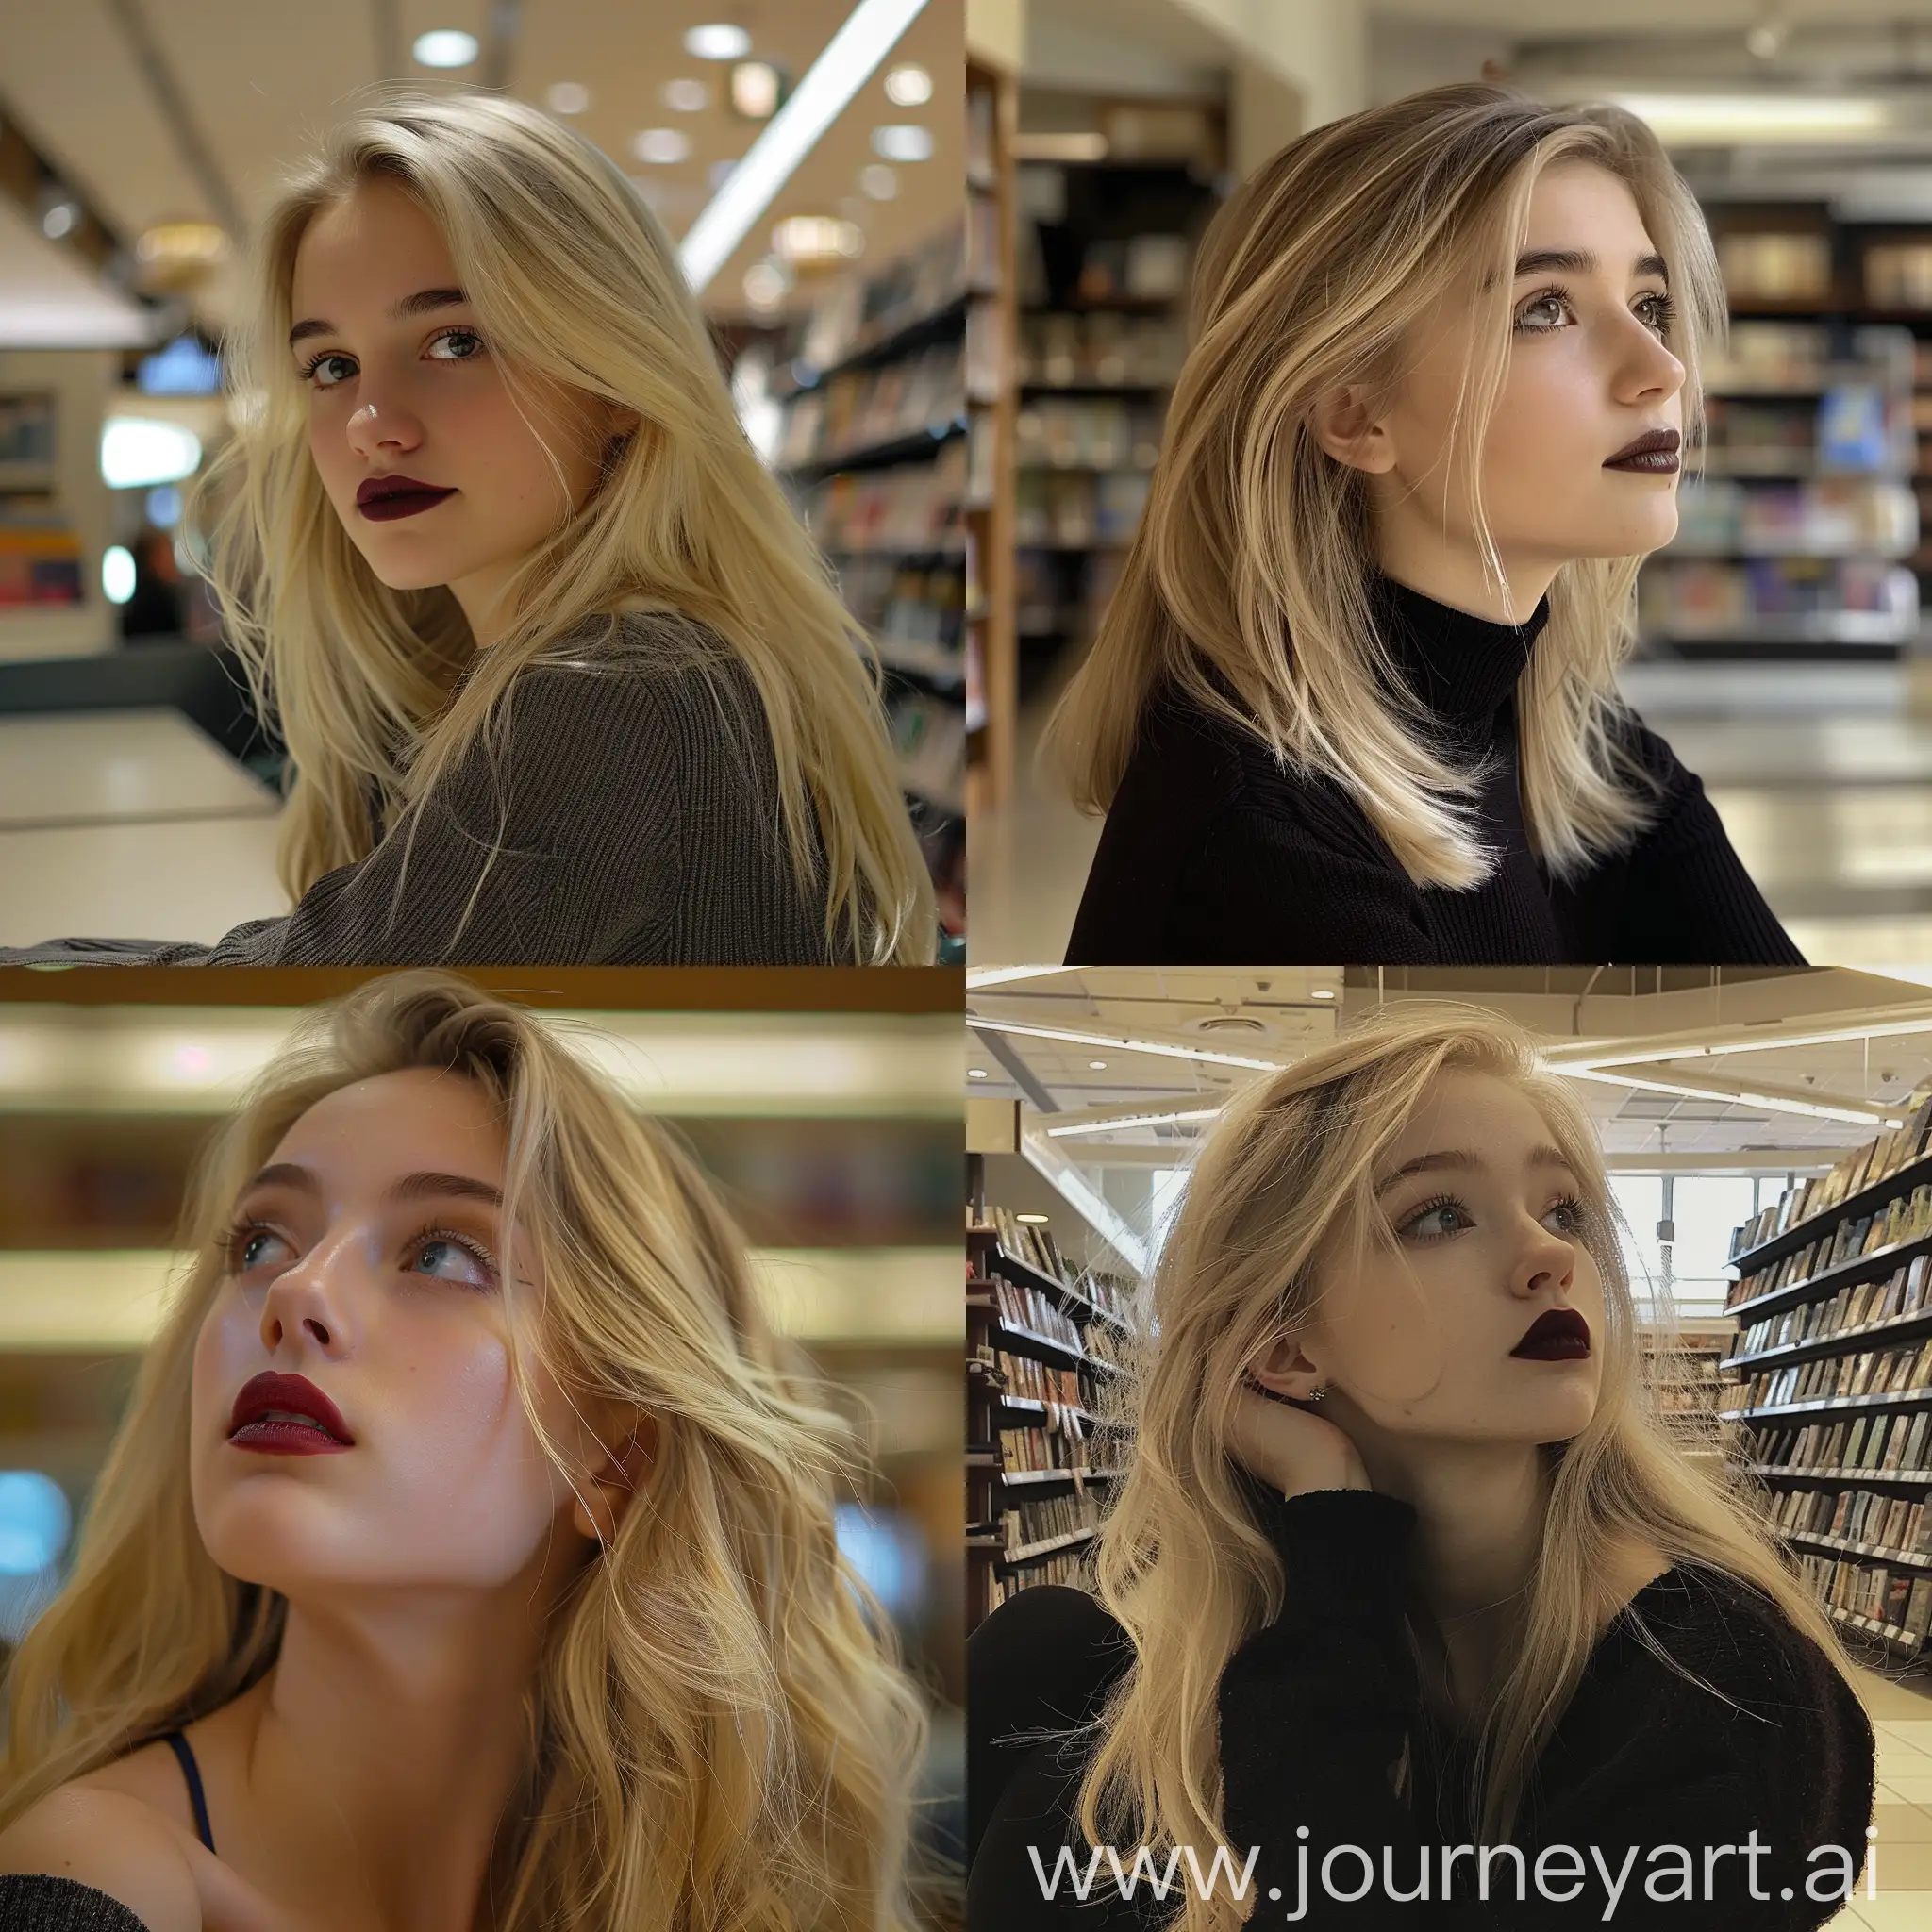 FourteenYearOld-Blonde-Girl-with-Preppy-Style-Sitting-in-Barnes-and-Noble